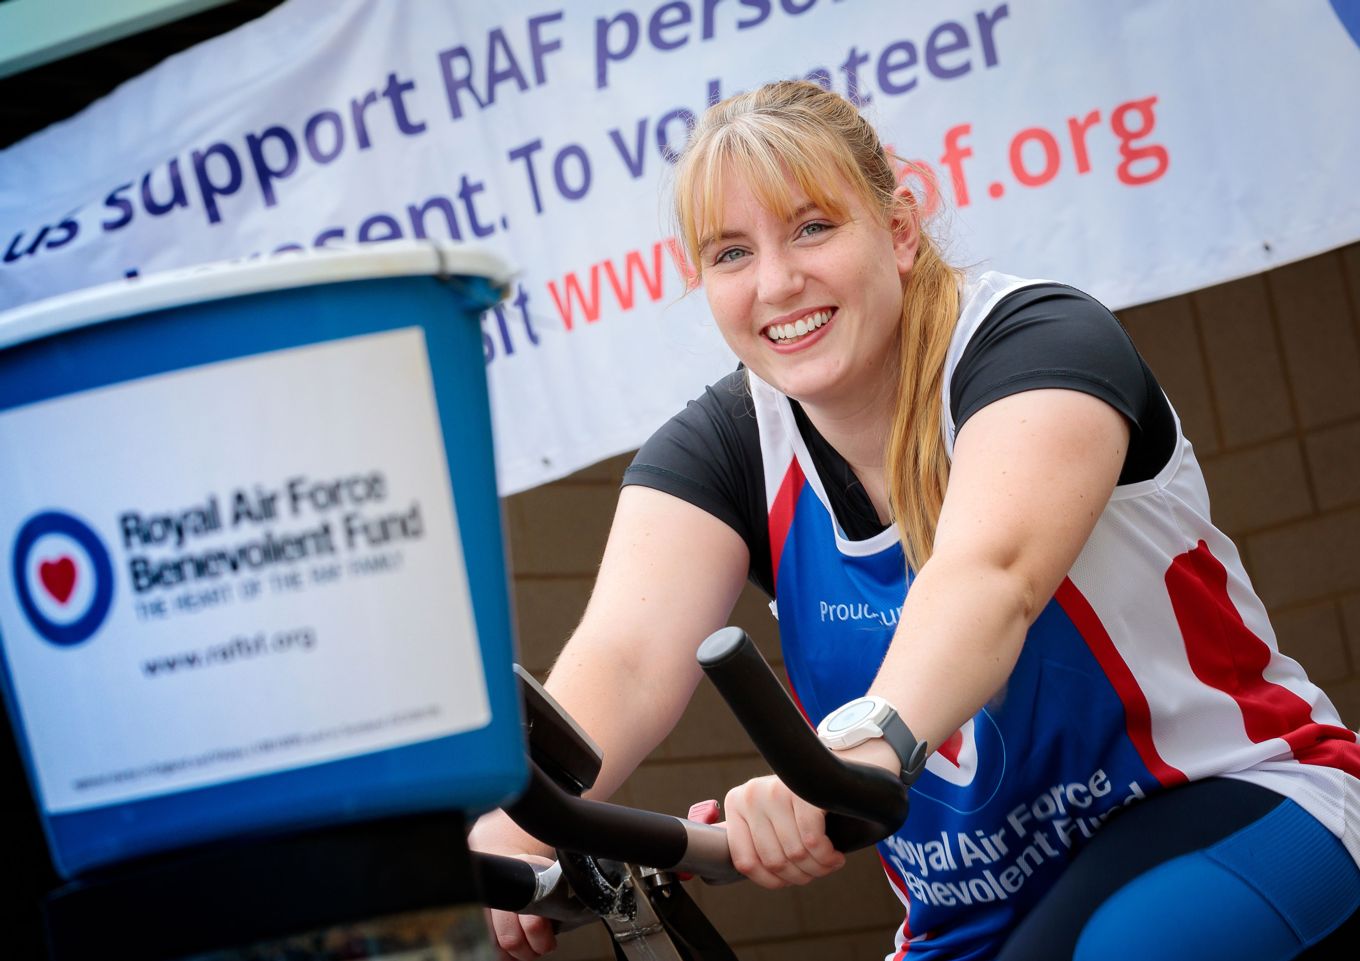 The event also raised money for the RAF Benevolent Fund, the leading welfare charity for the RAF